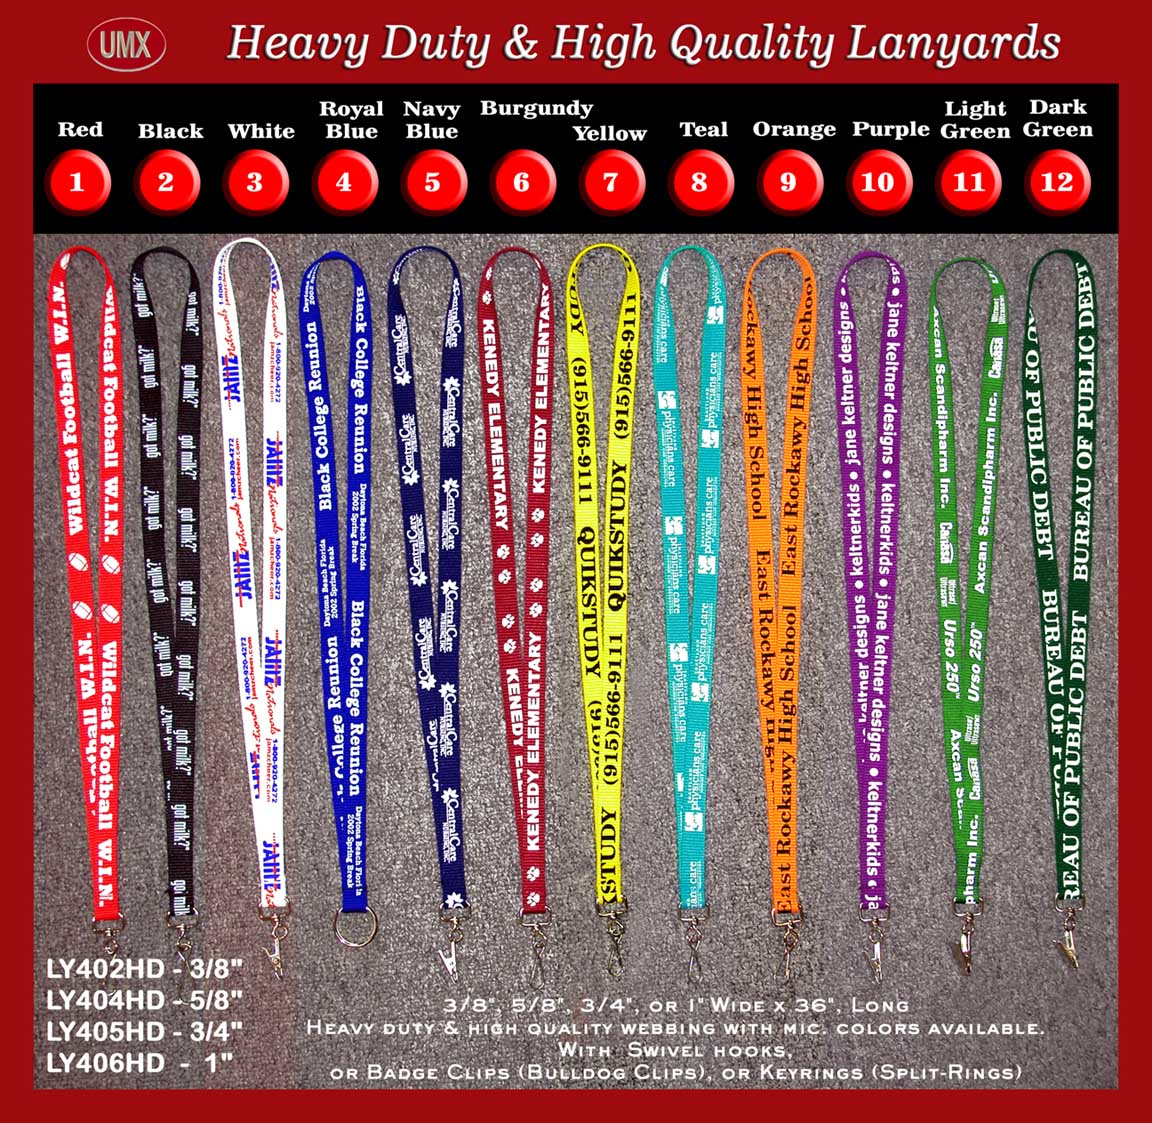 High-Quality and Heavy-Duty Lanyards with option of Safety Breakaway Protection